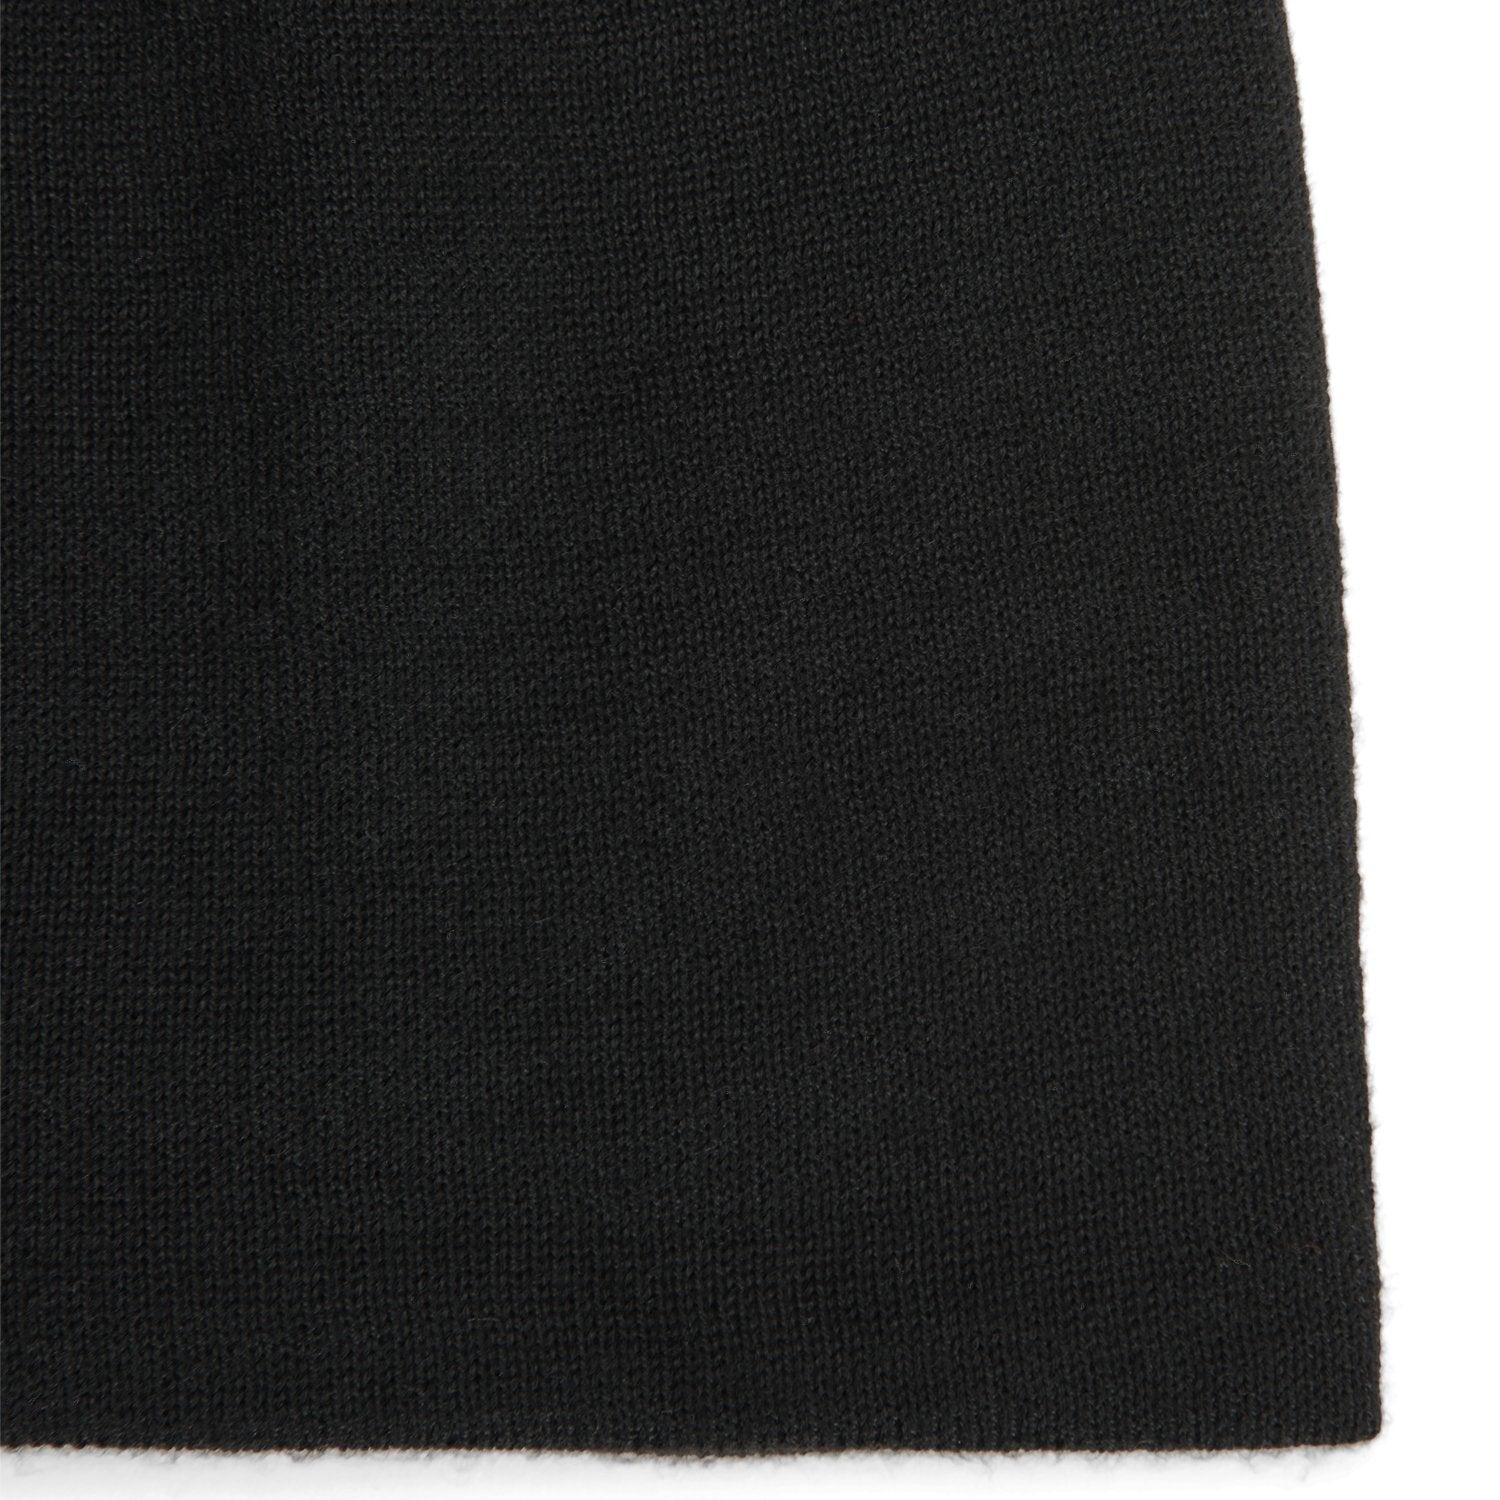 Headliner Polyester Hat - Black brim perspective - made in The USA Wigwam Socks